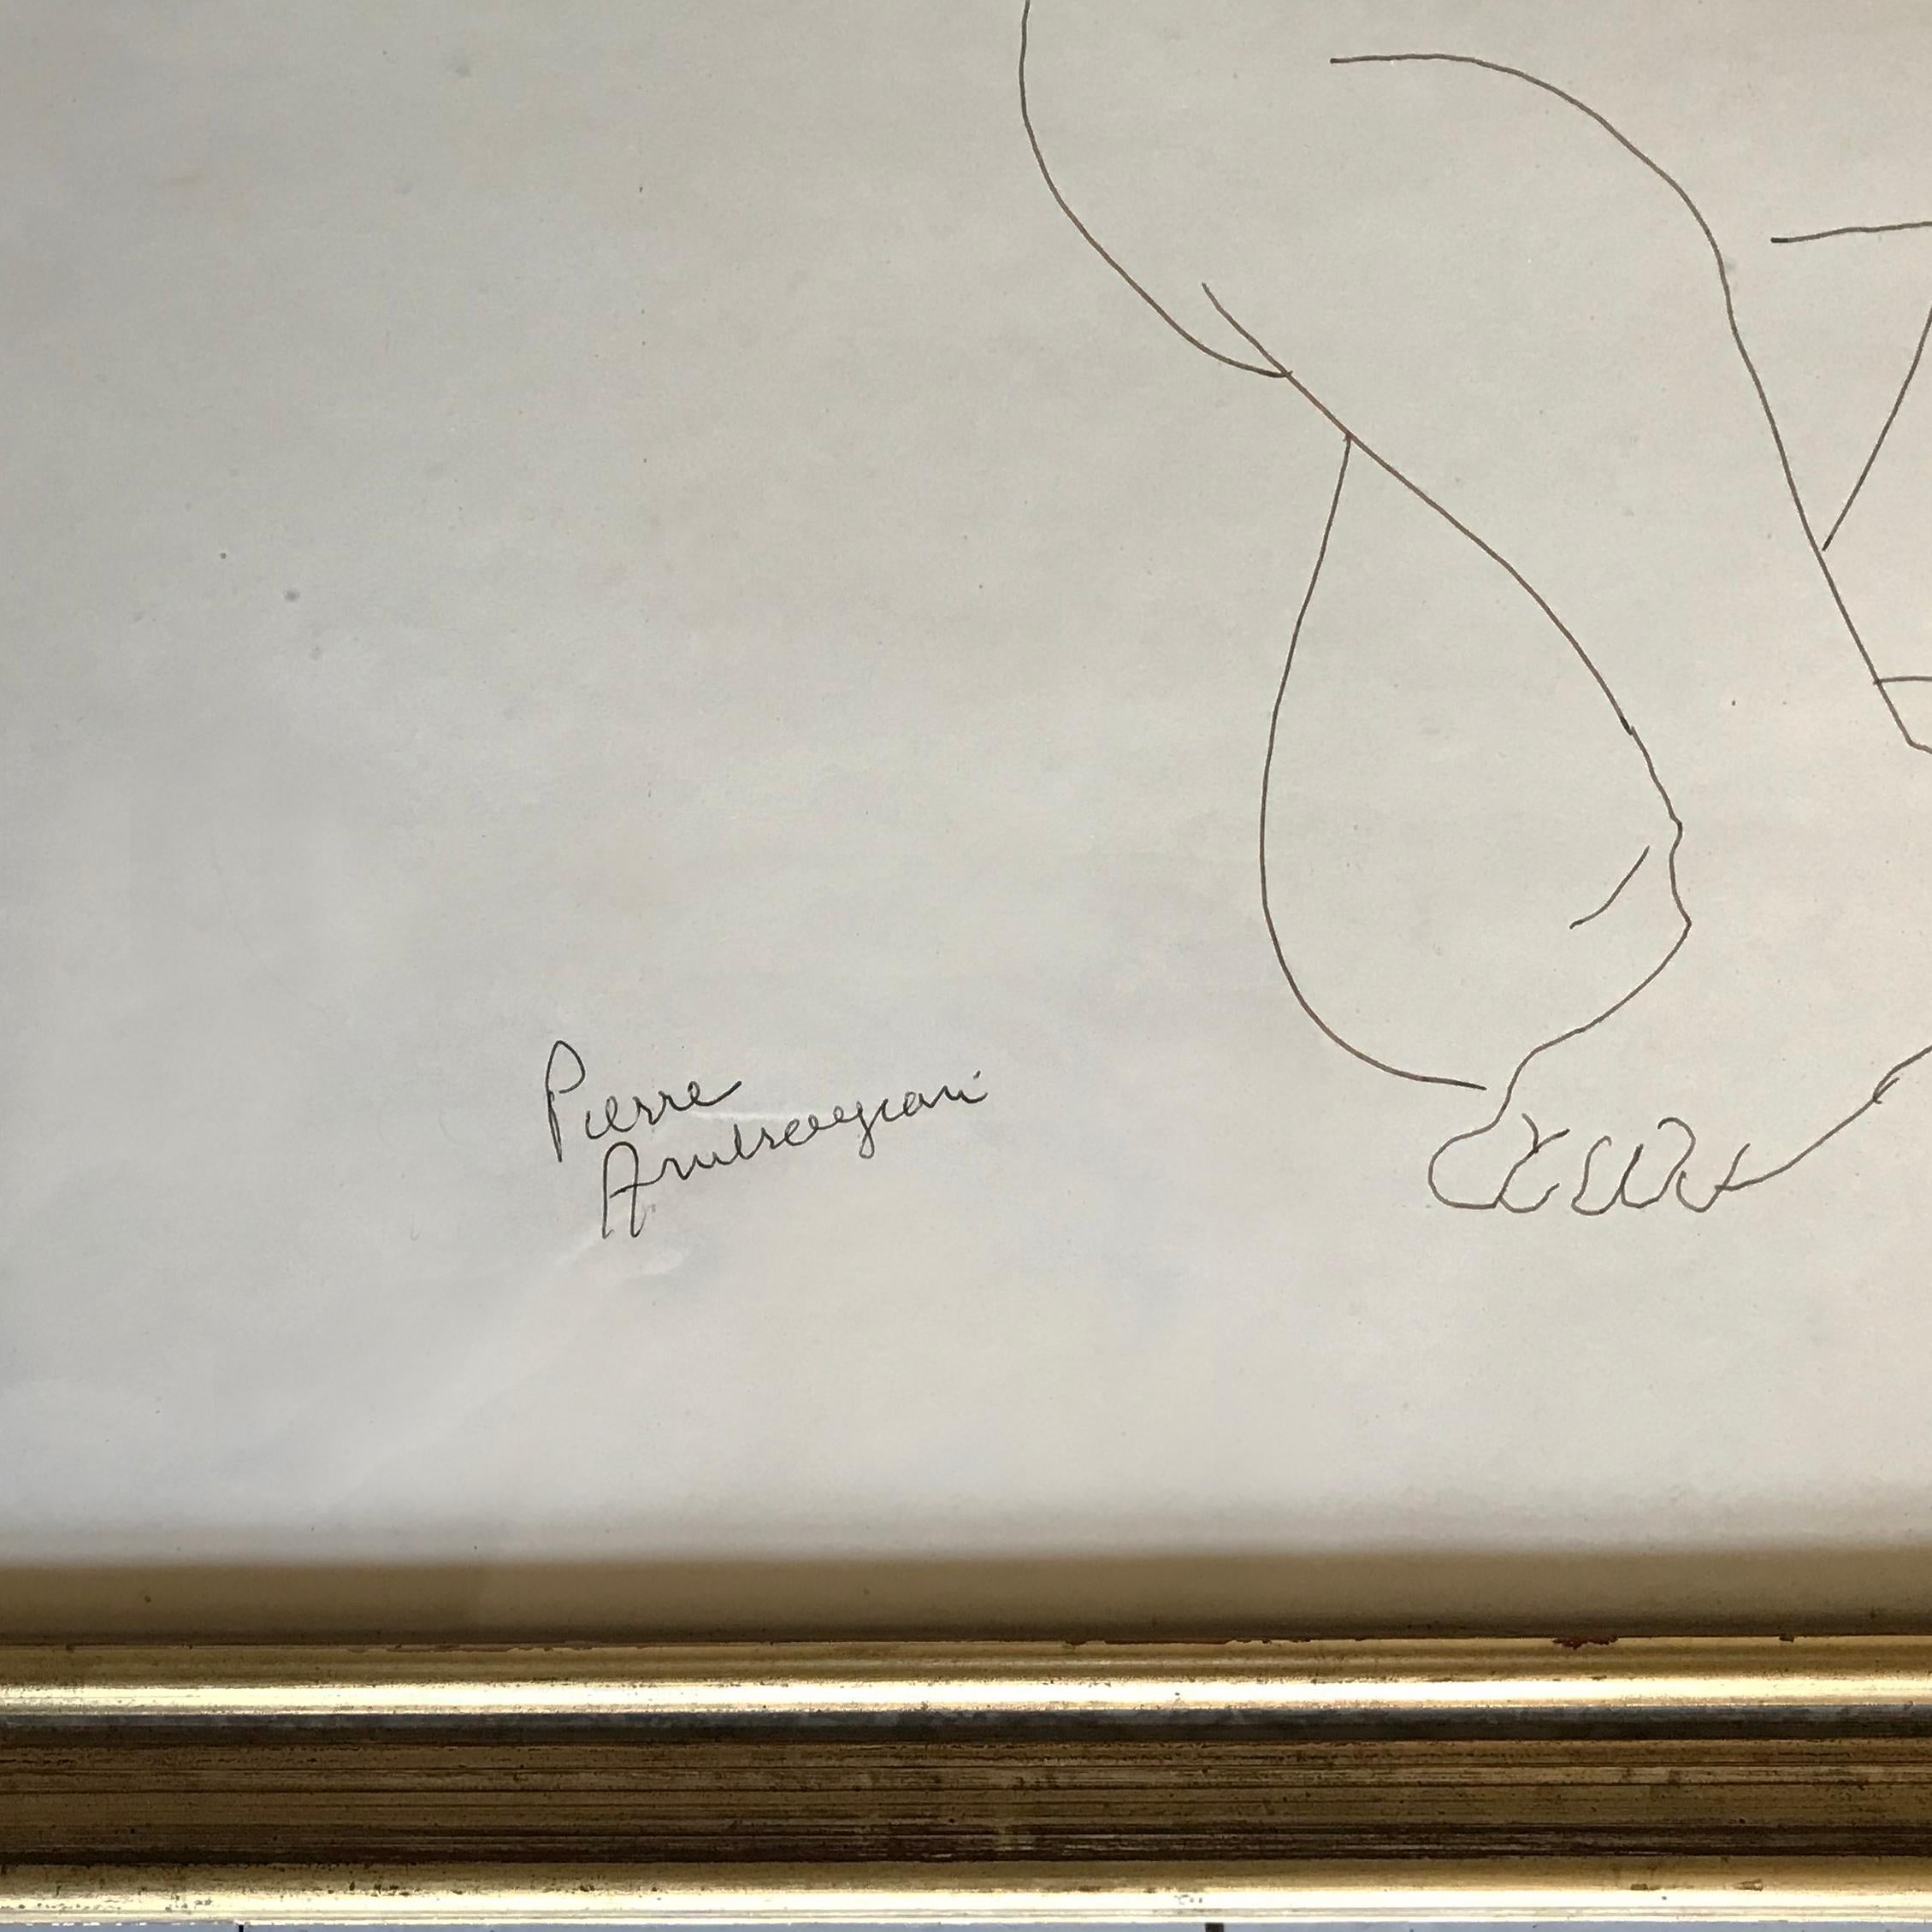 This signed nude pen and ink figure drawing confidently executed in the style of Matisse, using simple lines, boldly drawn, capturing the form of the model perfectly.